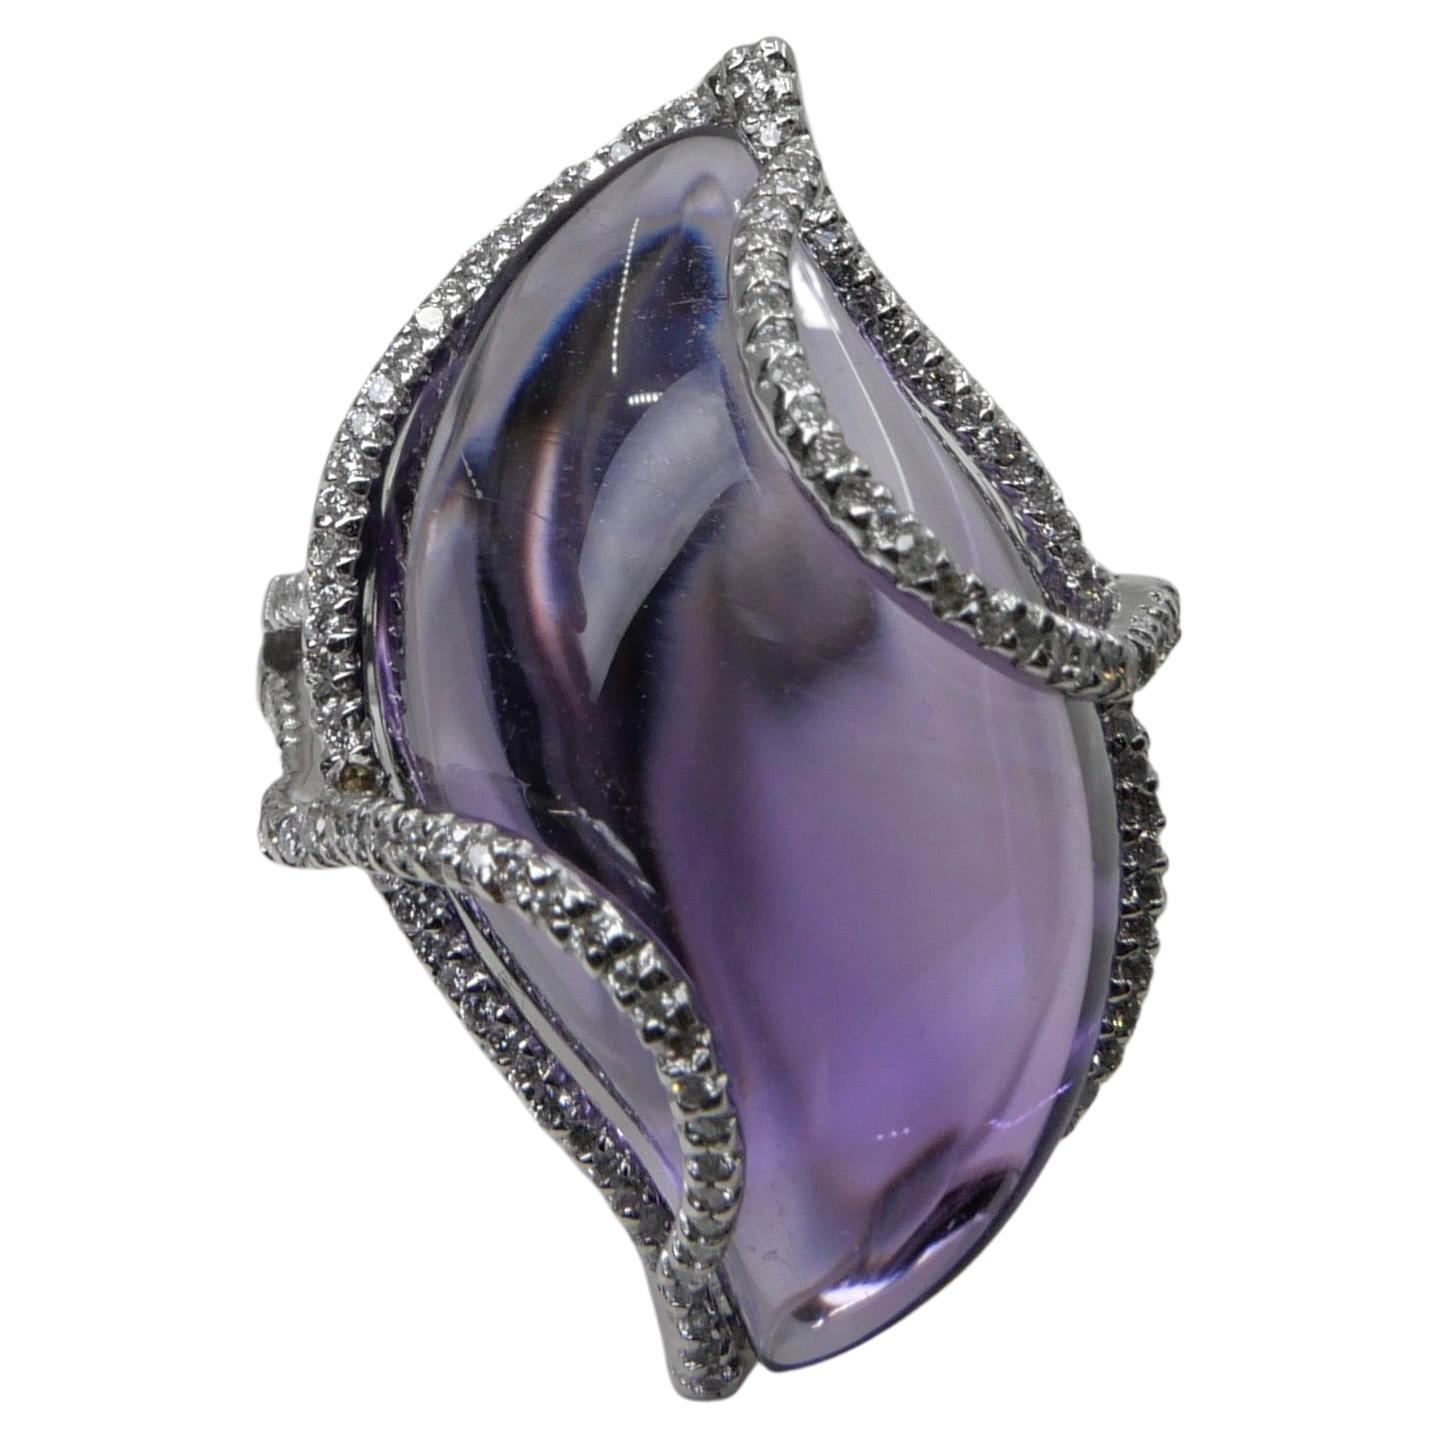 23 Carat Amethyst & Diamond Cocktail Ring. Large Contemporary Statement Ring.   